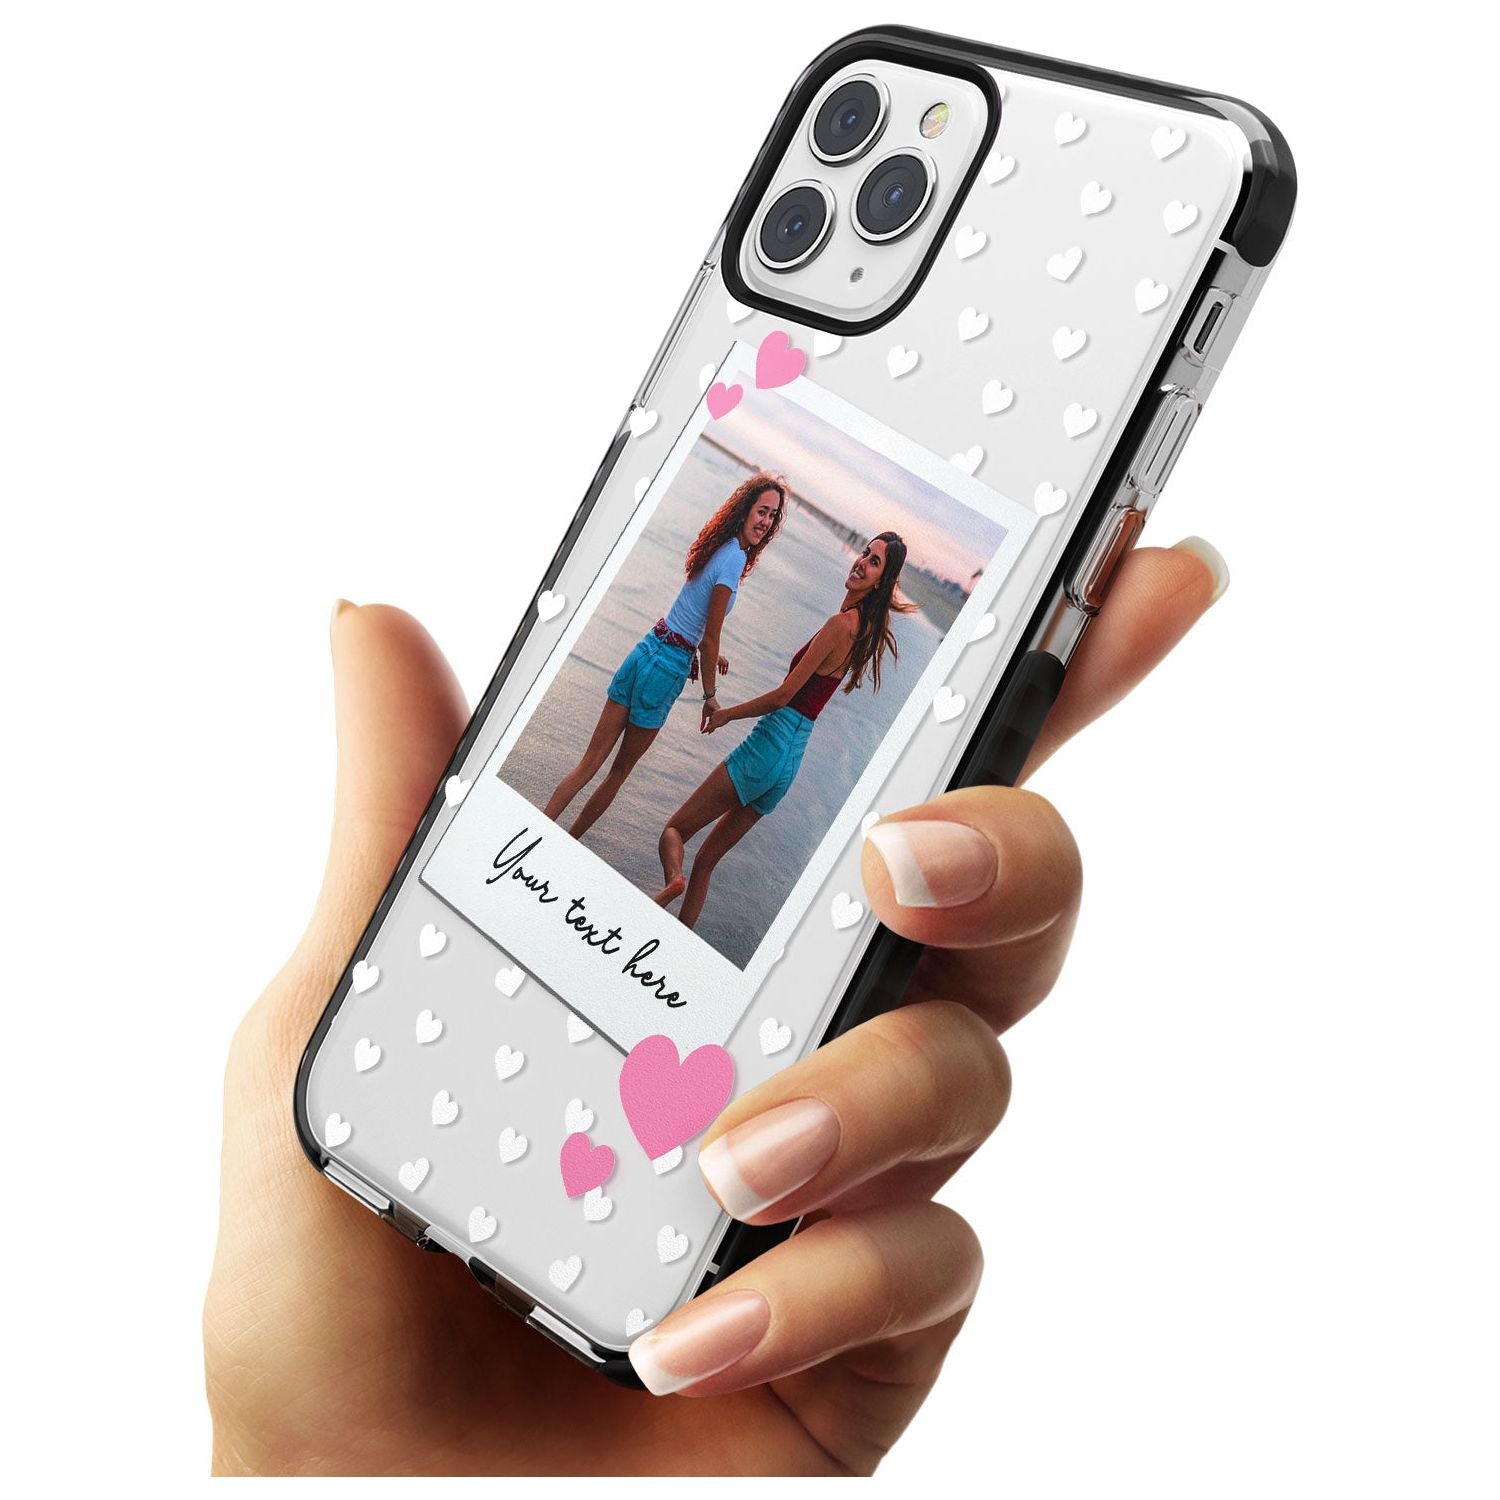 Instant Film & Hearts Pink Fade Impact Phone Case for iPhone 11